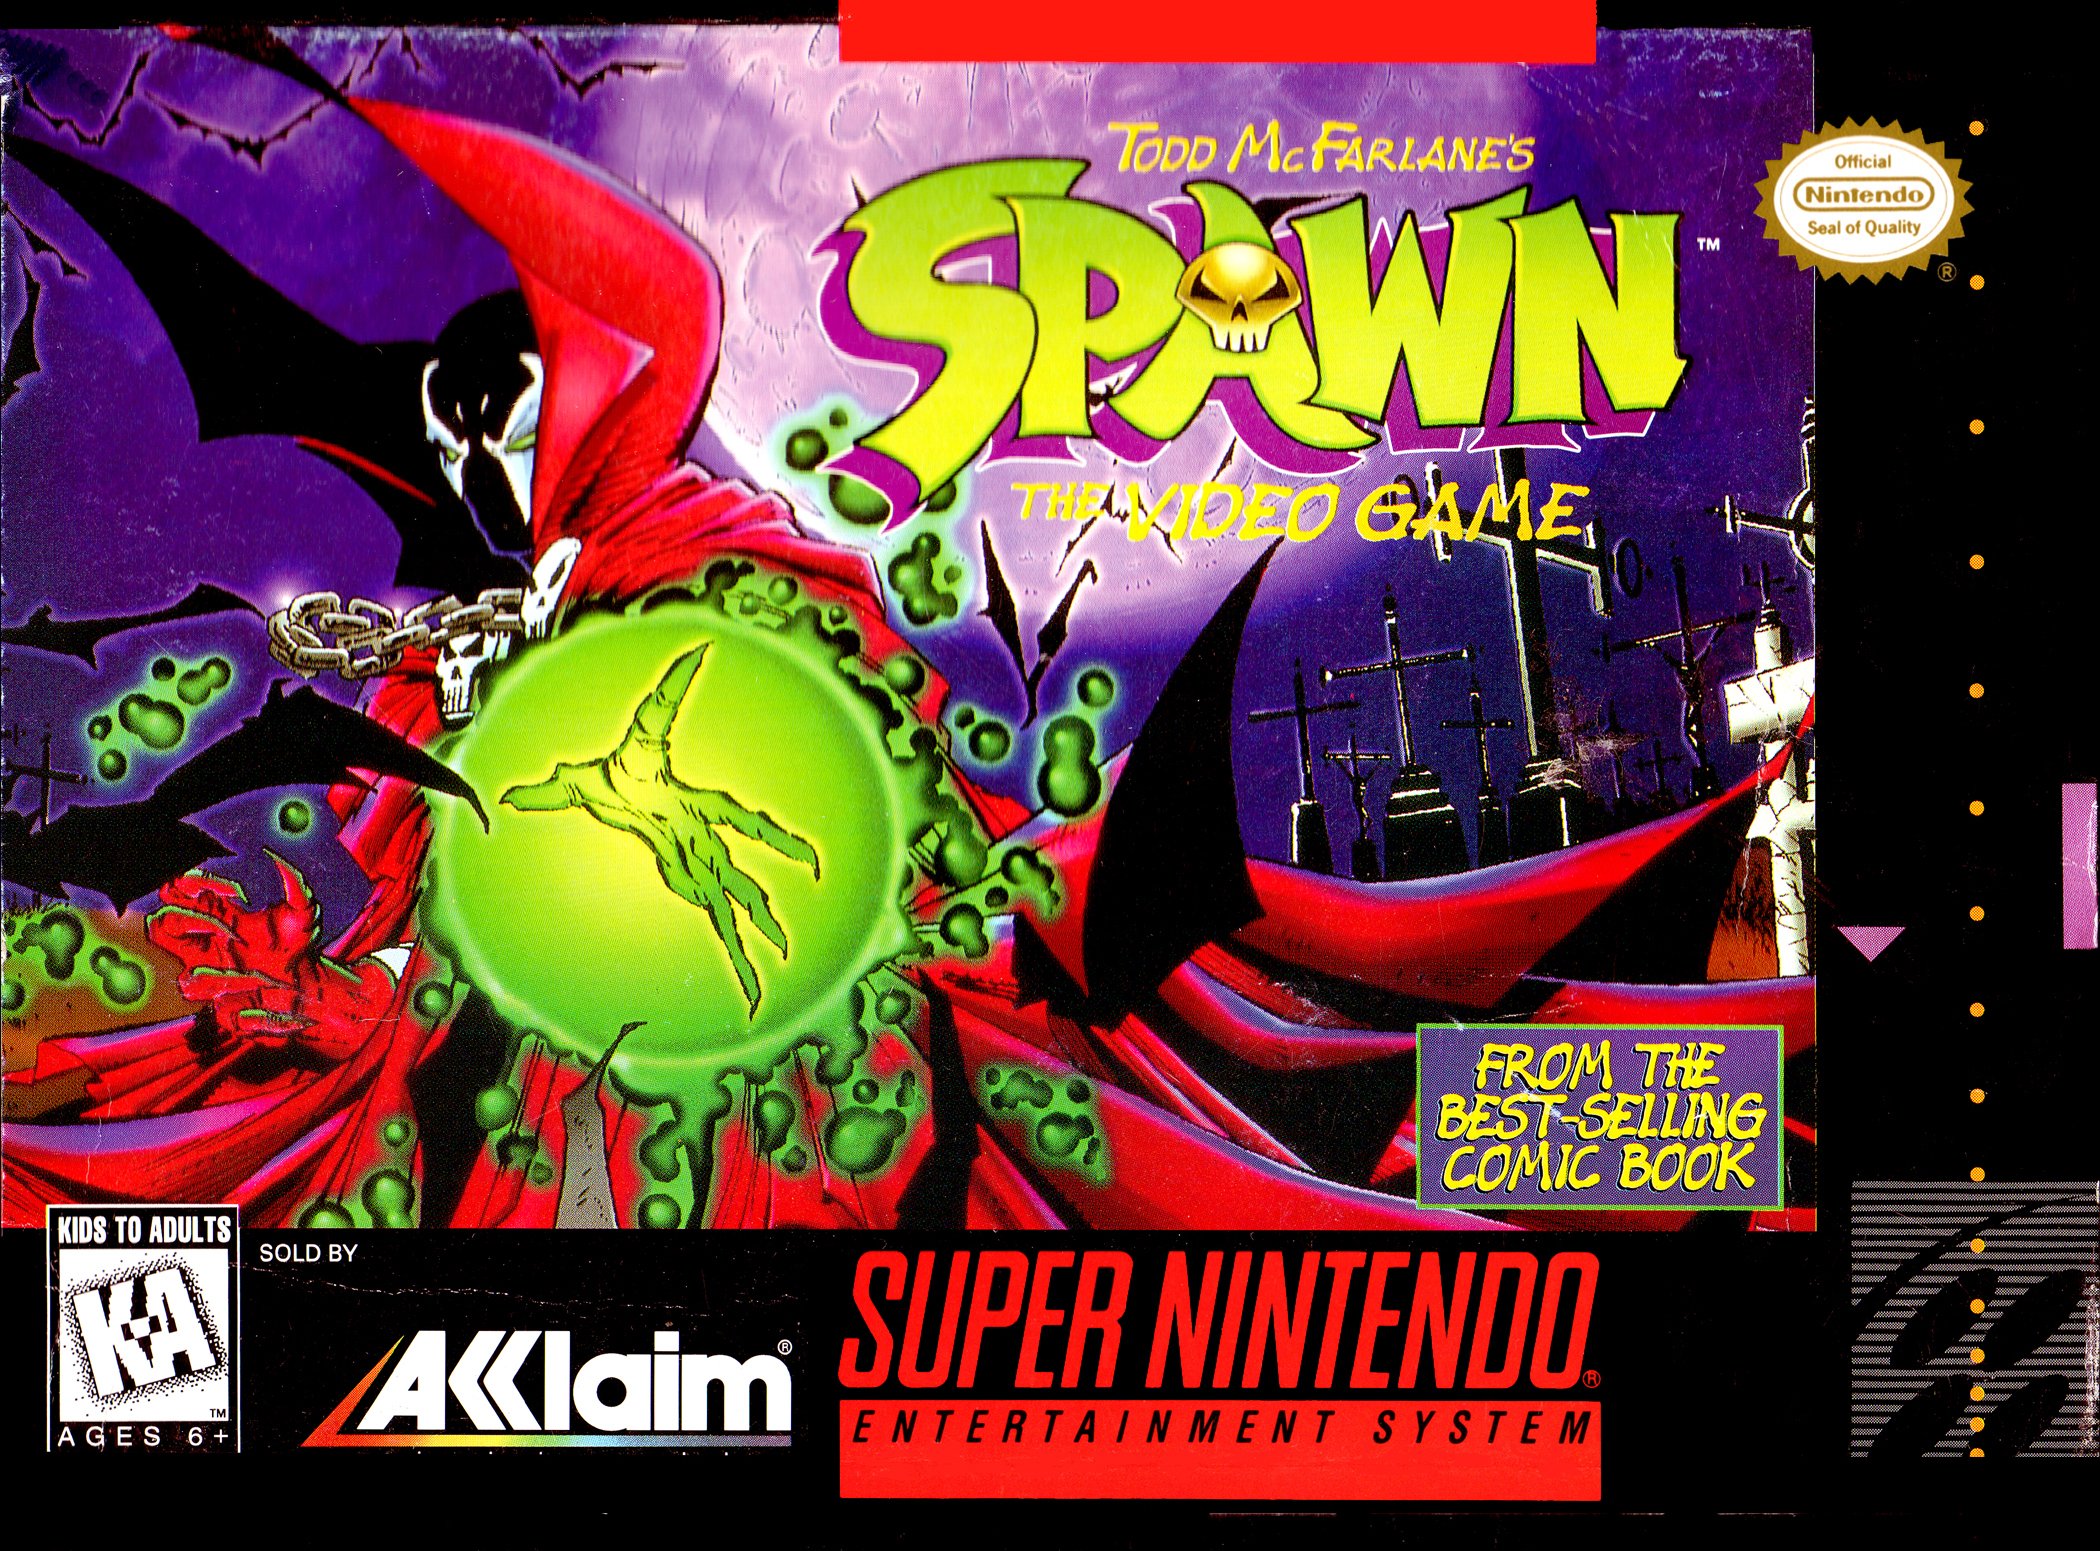 Todd McFarlane's Spawn: The Video Game Фото